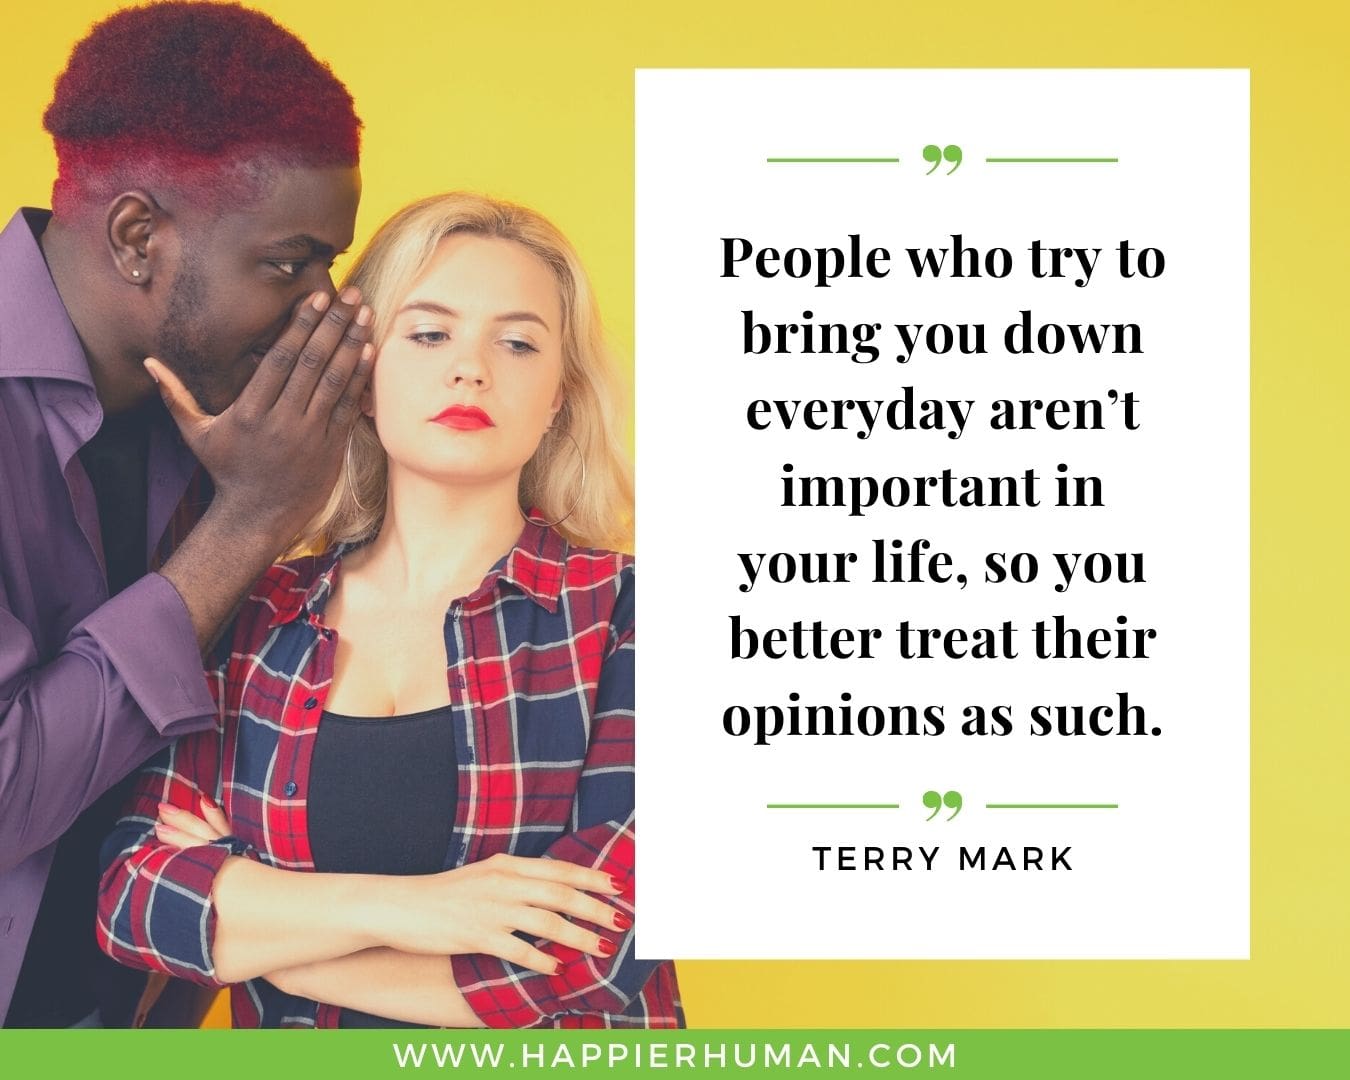 Haters Quotes - “People who try to bring you down everyday aren’t important in your life, so you better treat their opinions as such.” – Terry Mark